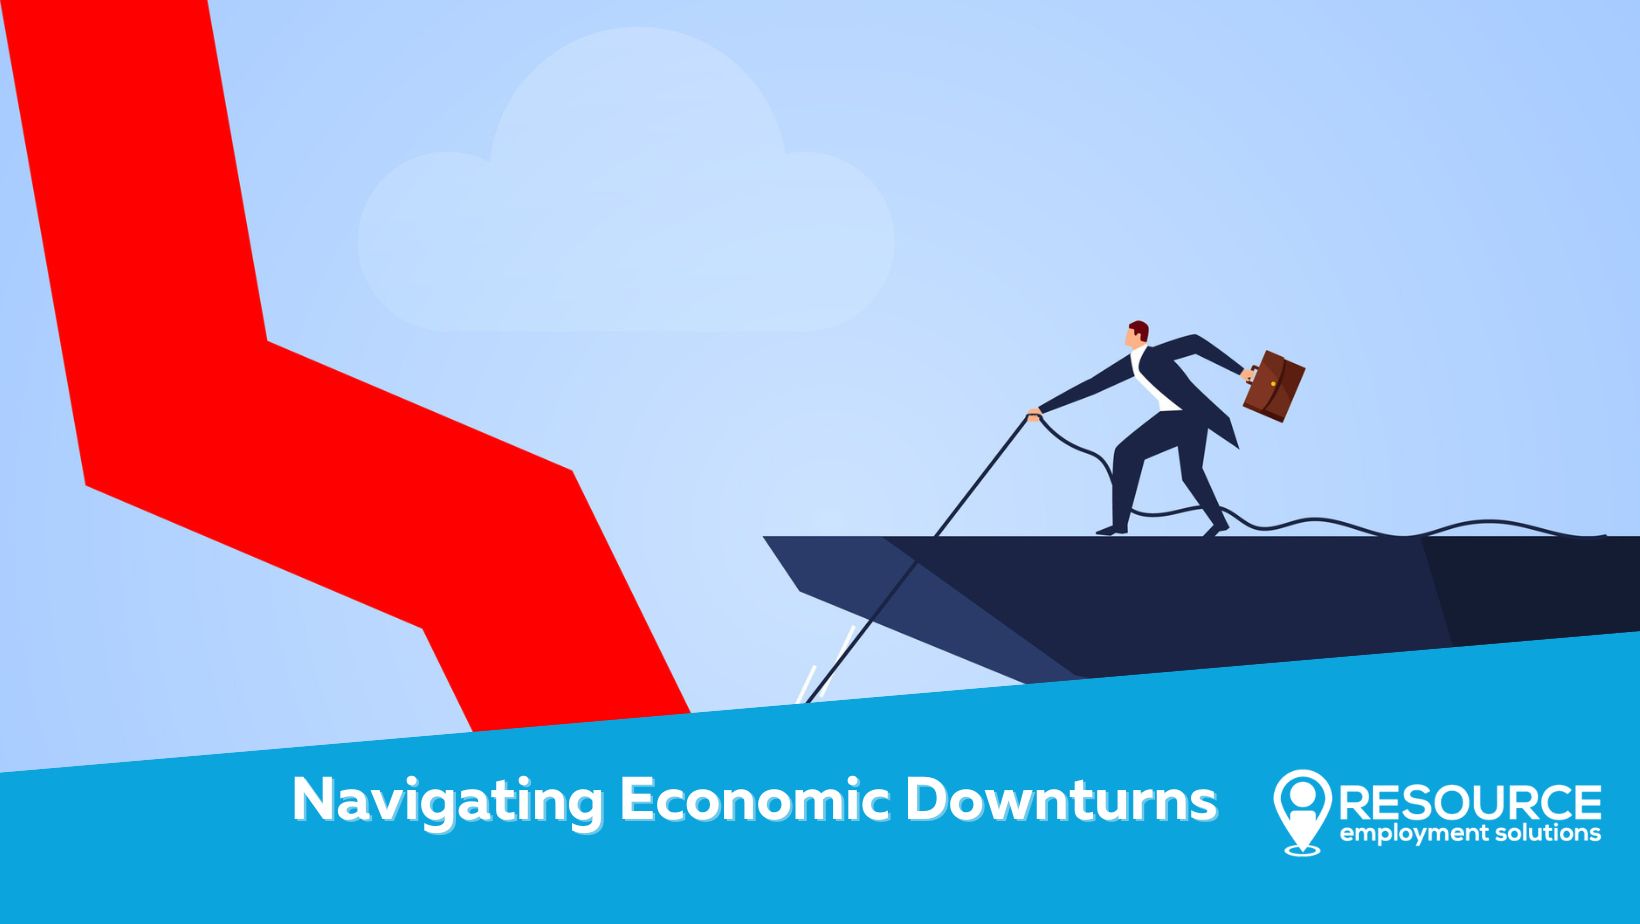 Navigating Economic Downturns: A Sympathetic Approach to Talent and Productivity